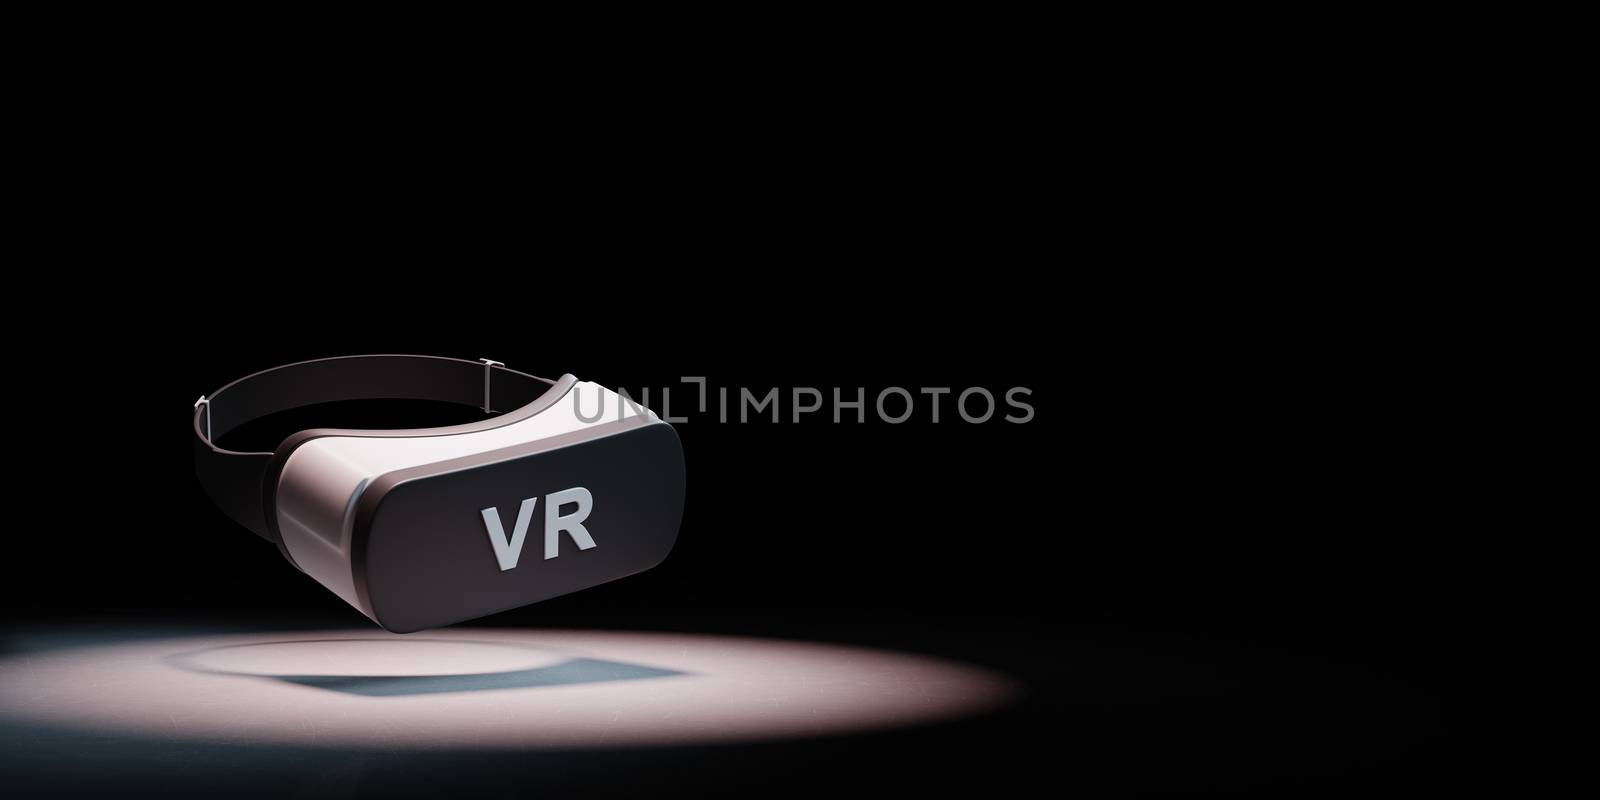 Black and White VR Virtual Reality Headset Spotlighted on Black Background with Copy Space 3D Illustration